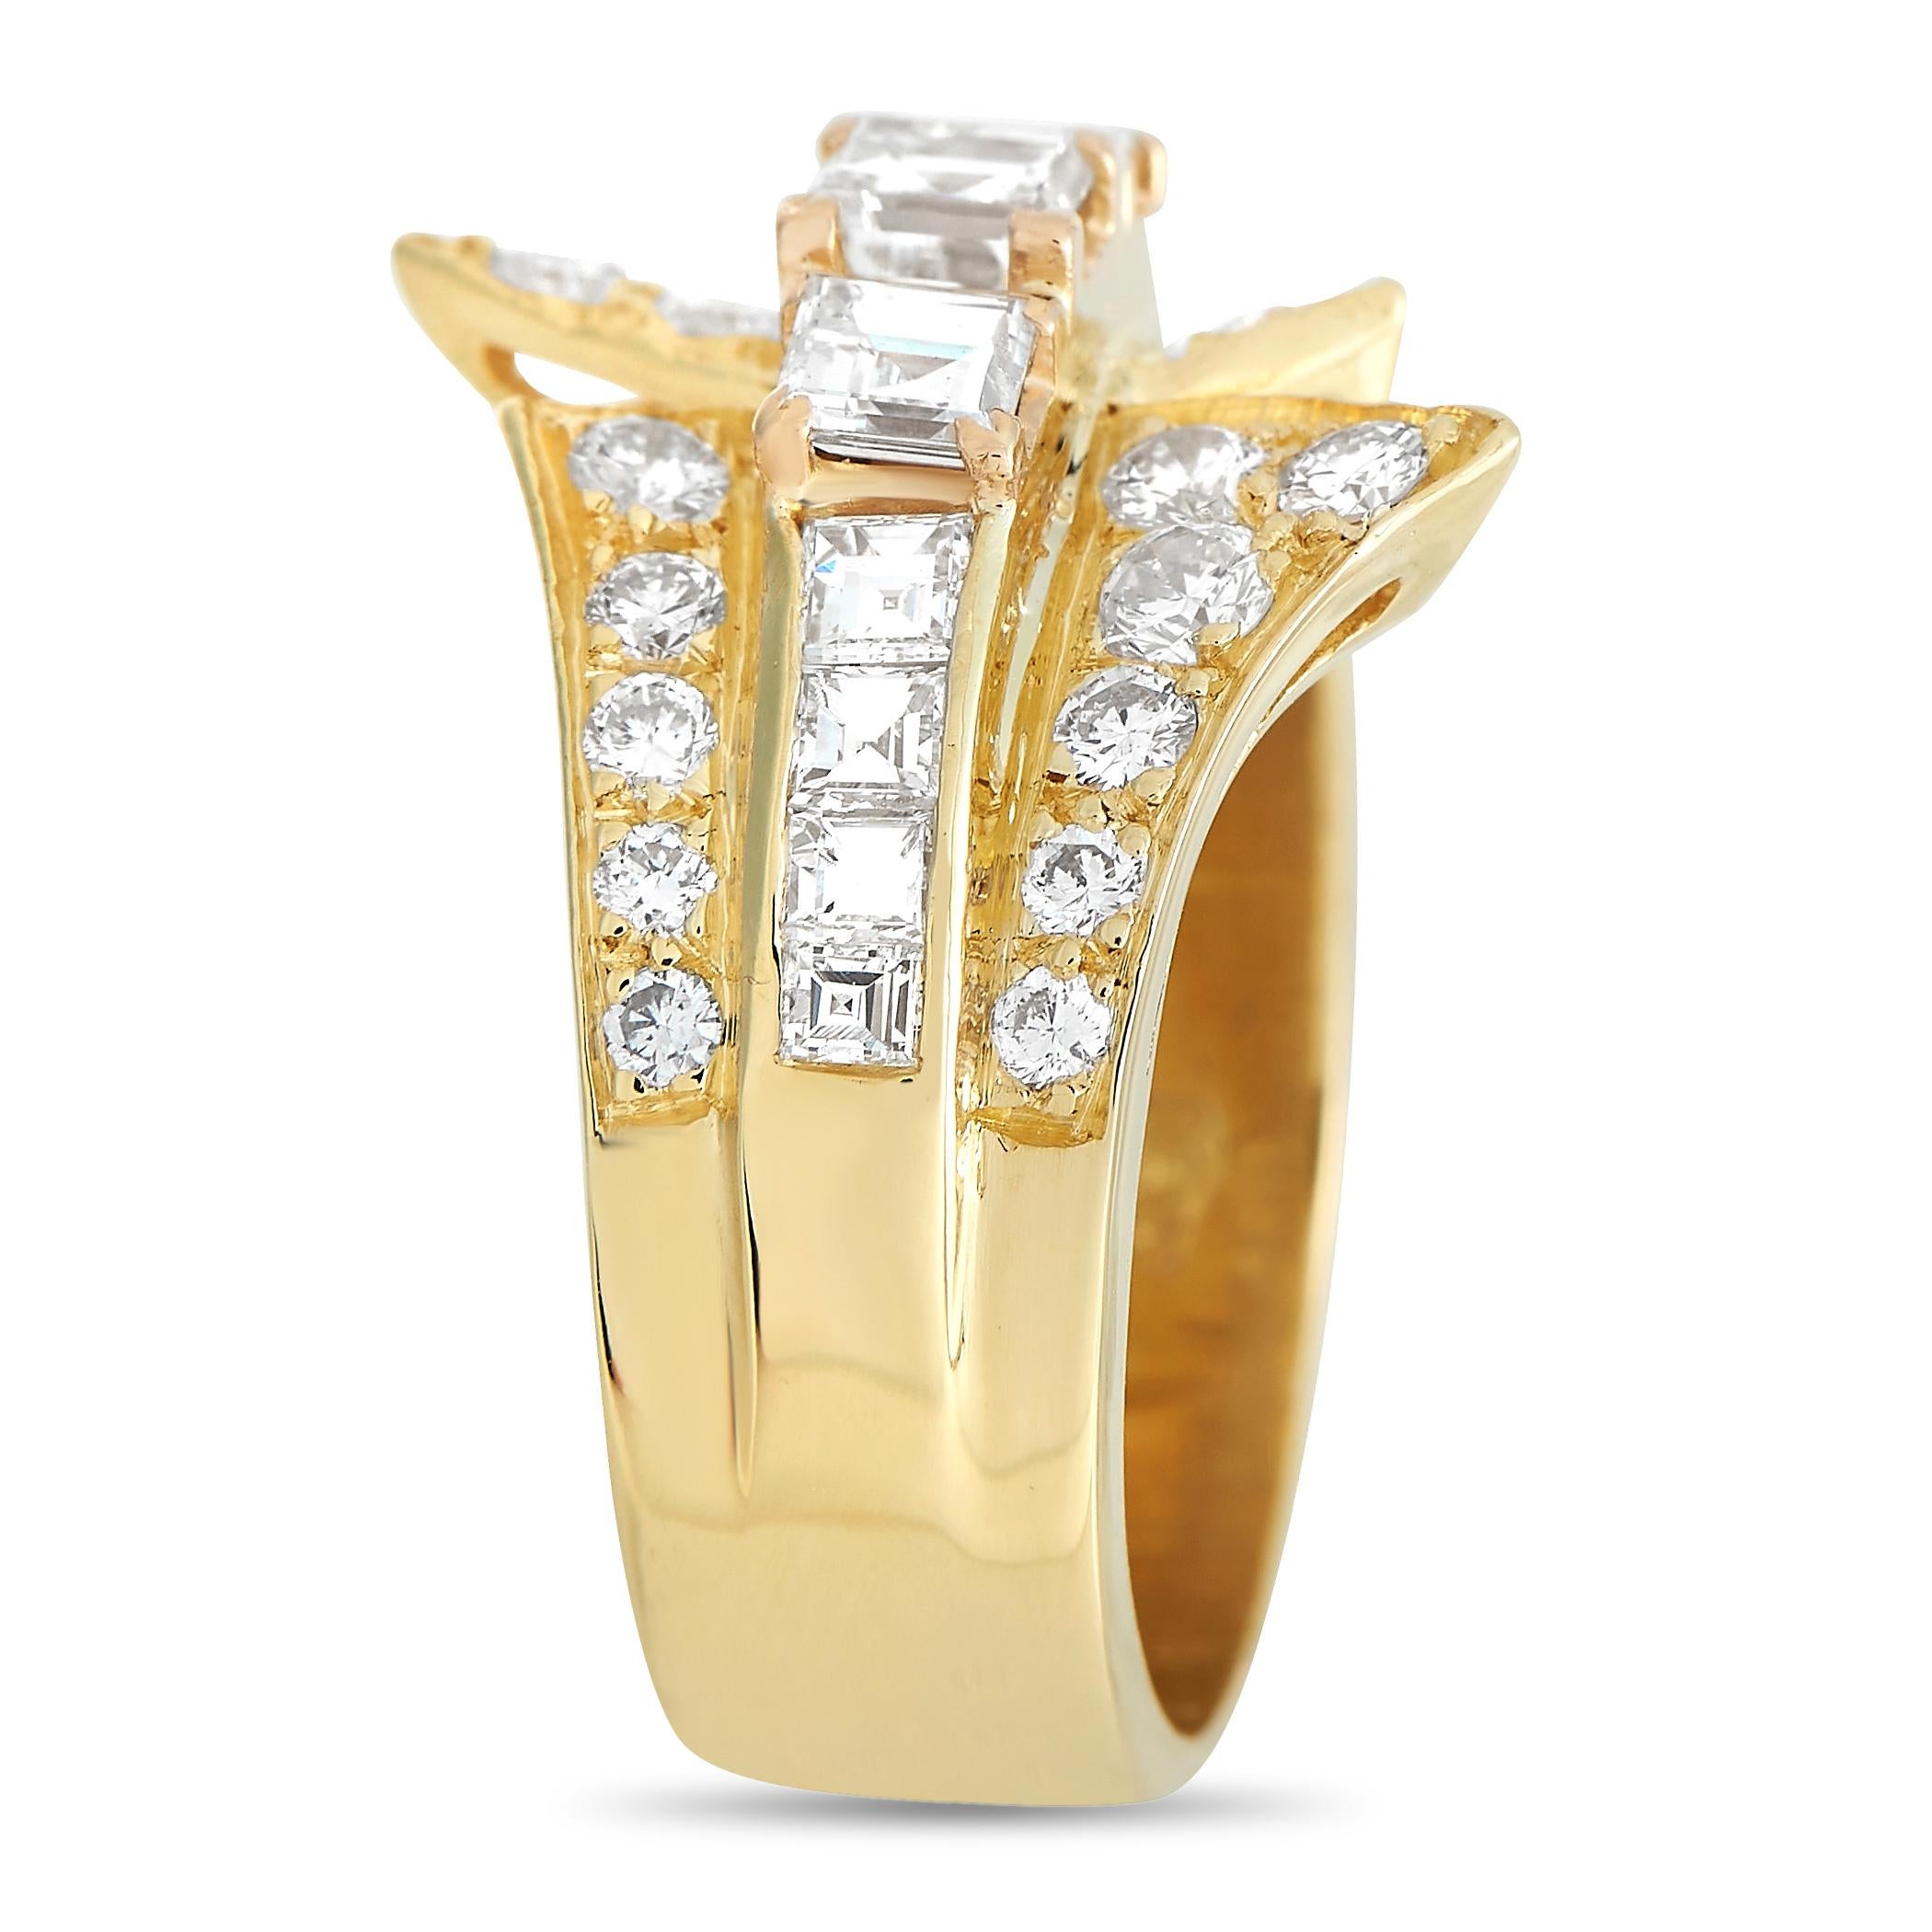 A sculptural jewel to polish your looks with an elegant style statement. This 18K yellow gold ring measures 7mm thick, with top dimensions measuring 15mm x 15mm. The warm yellow gold band features a central row of tapering diamonds, decorated with